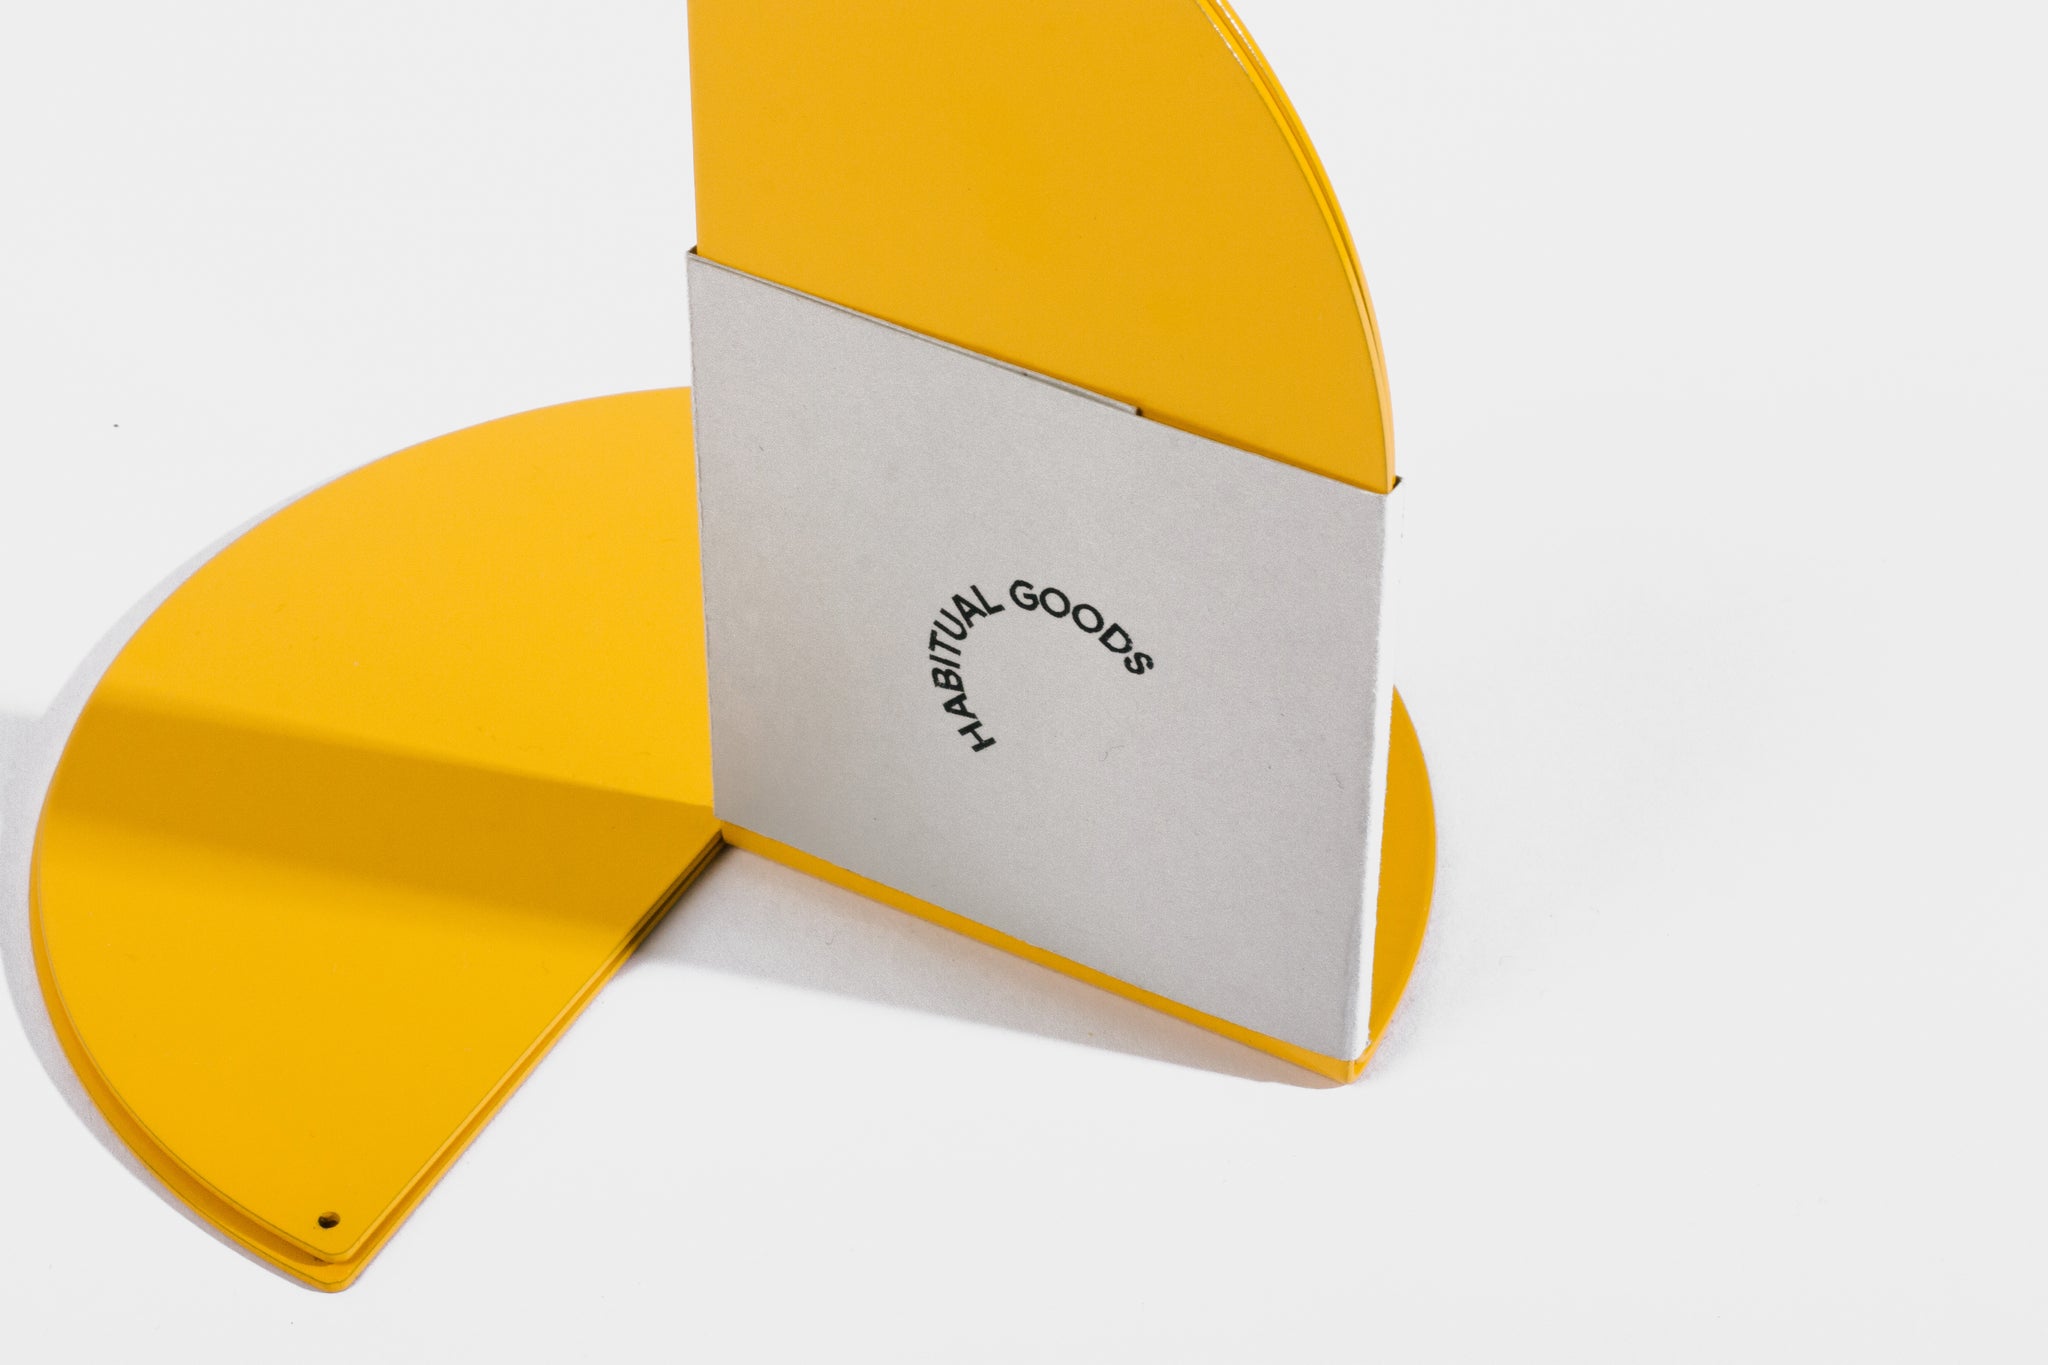 Folded Bookend - Yellow